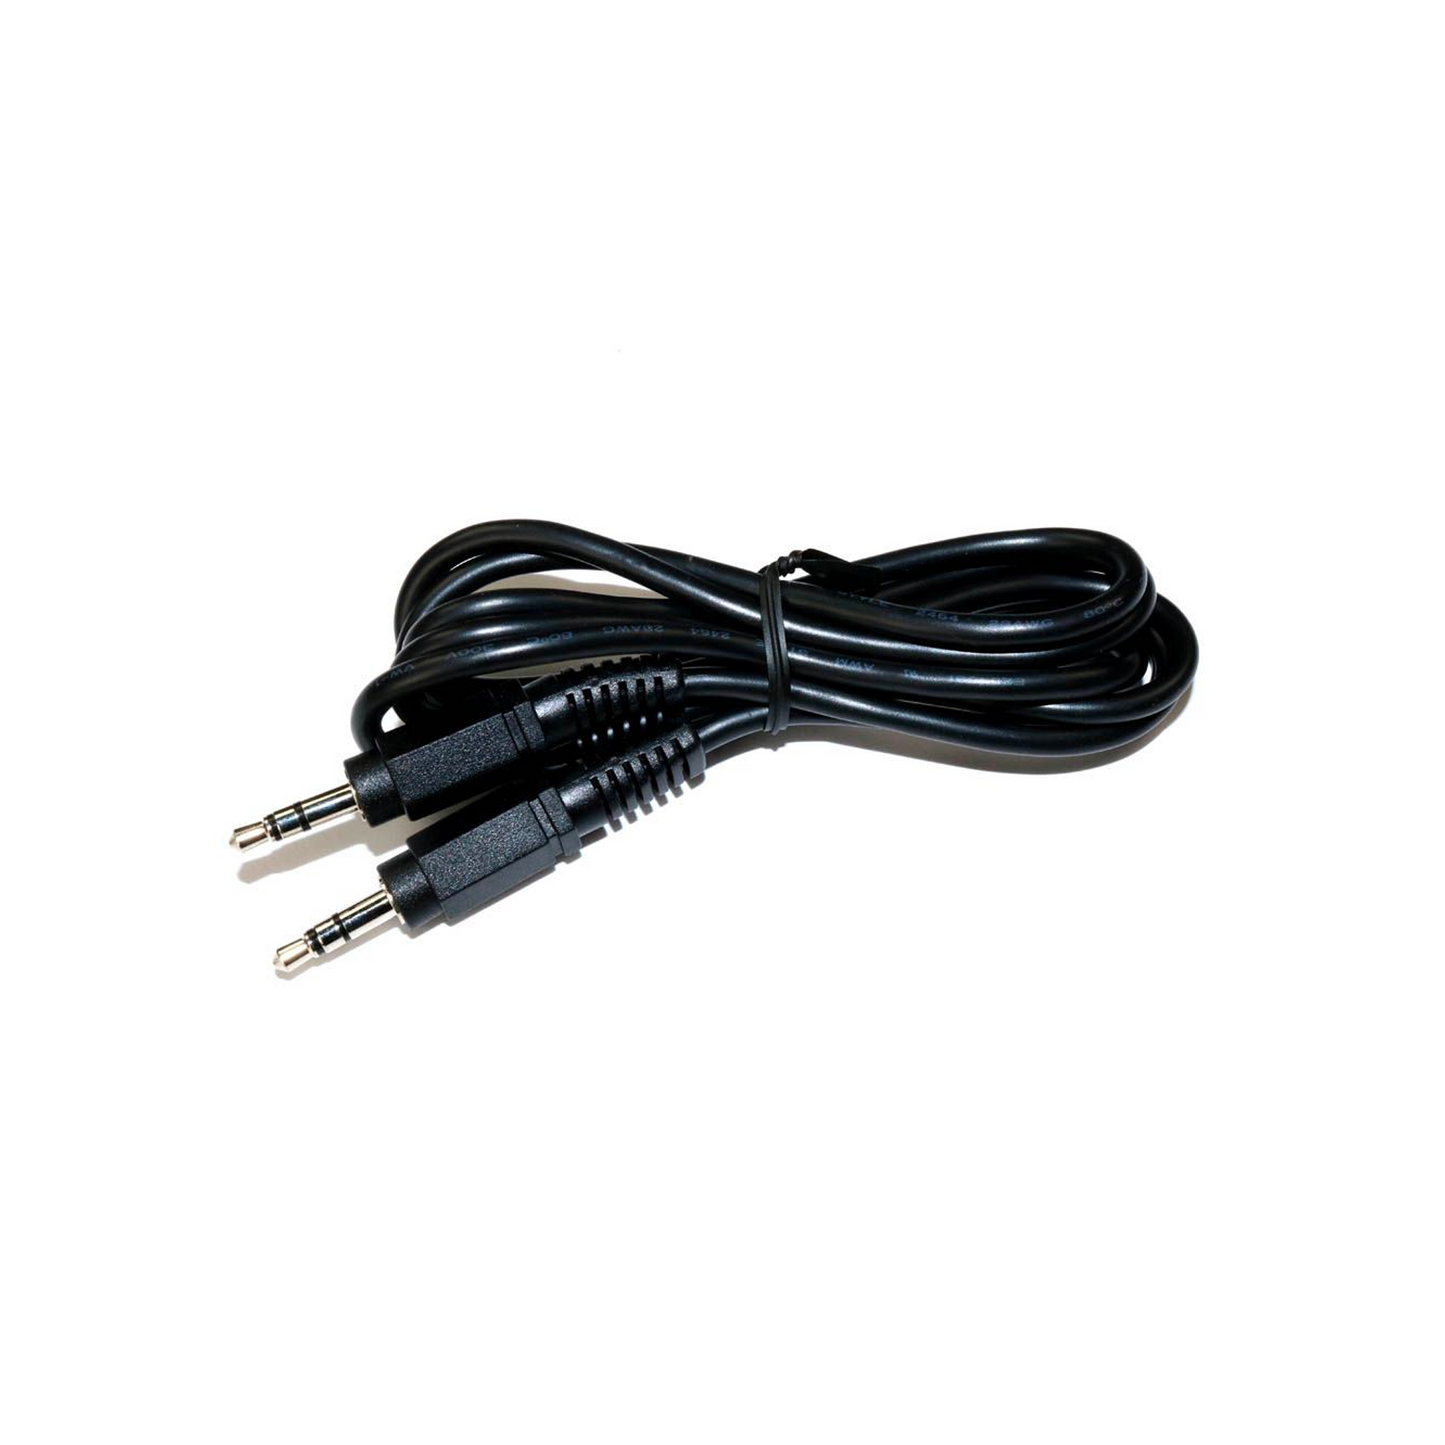 Hakko Products_ B3253 Connecting Cord_ Soldering Accessories_ Hakko Products